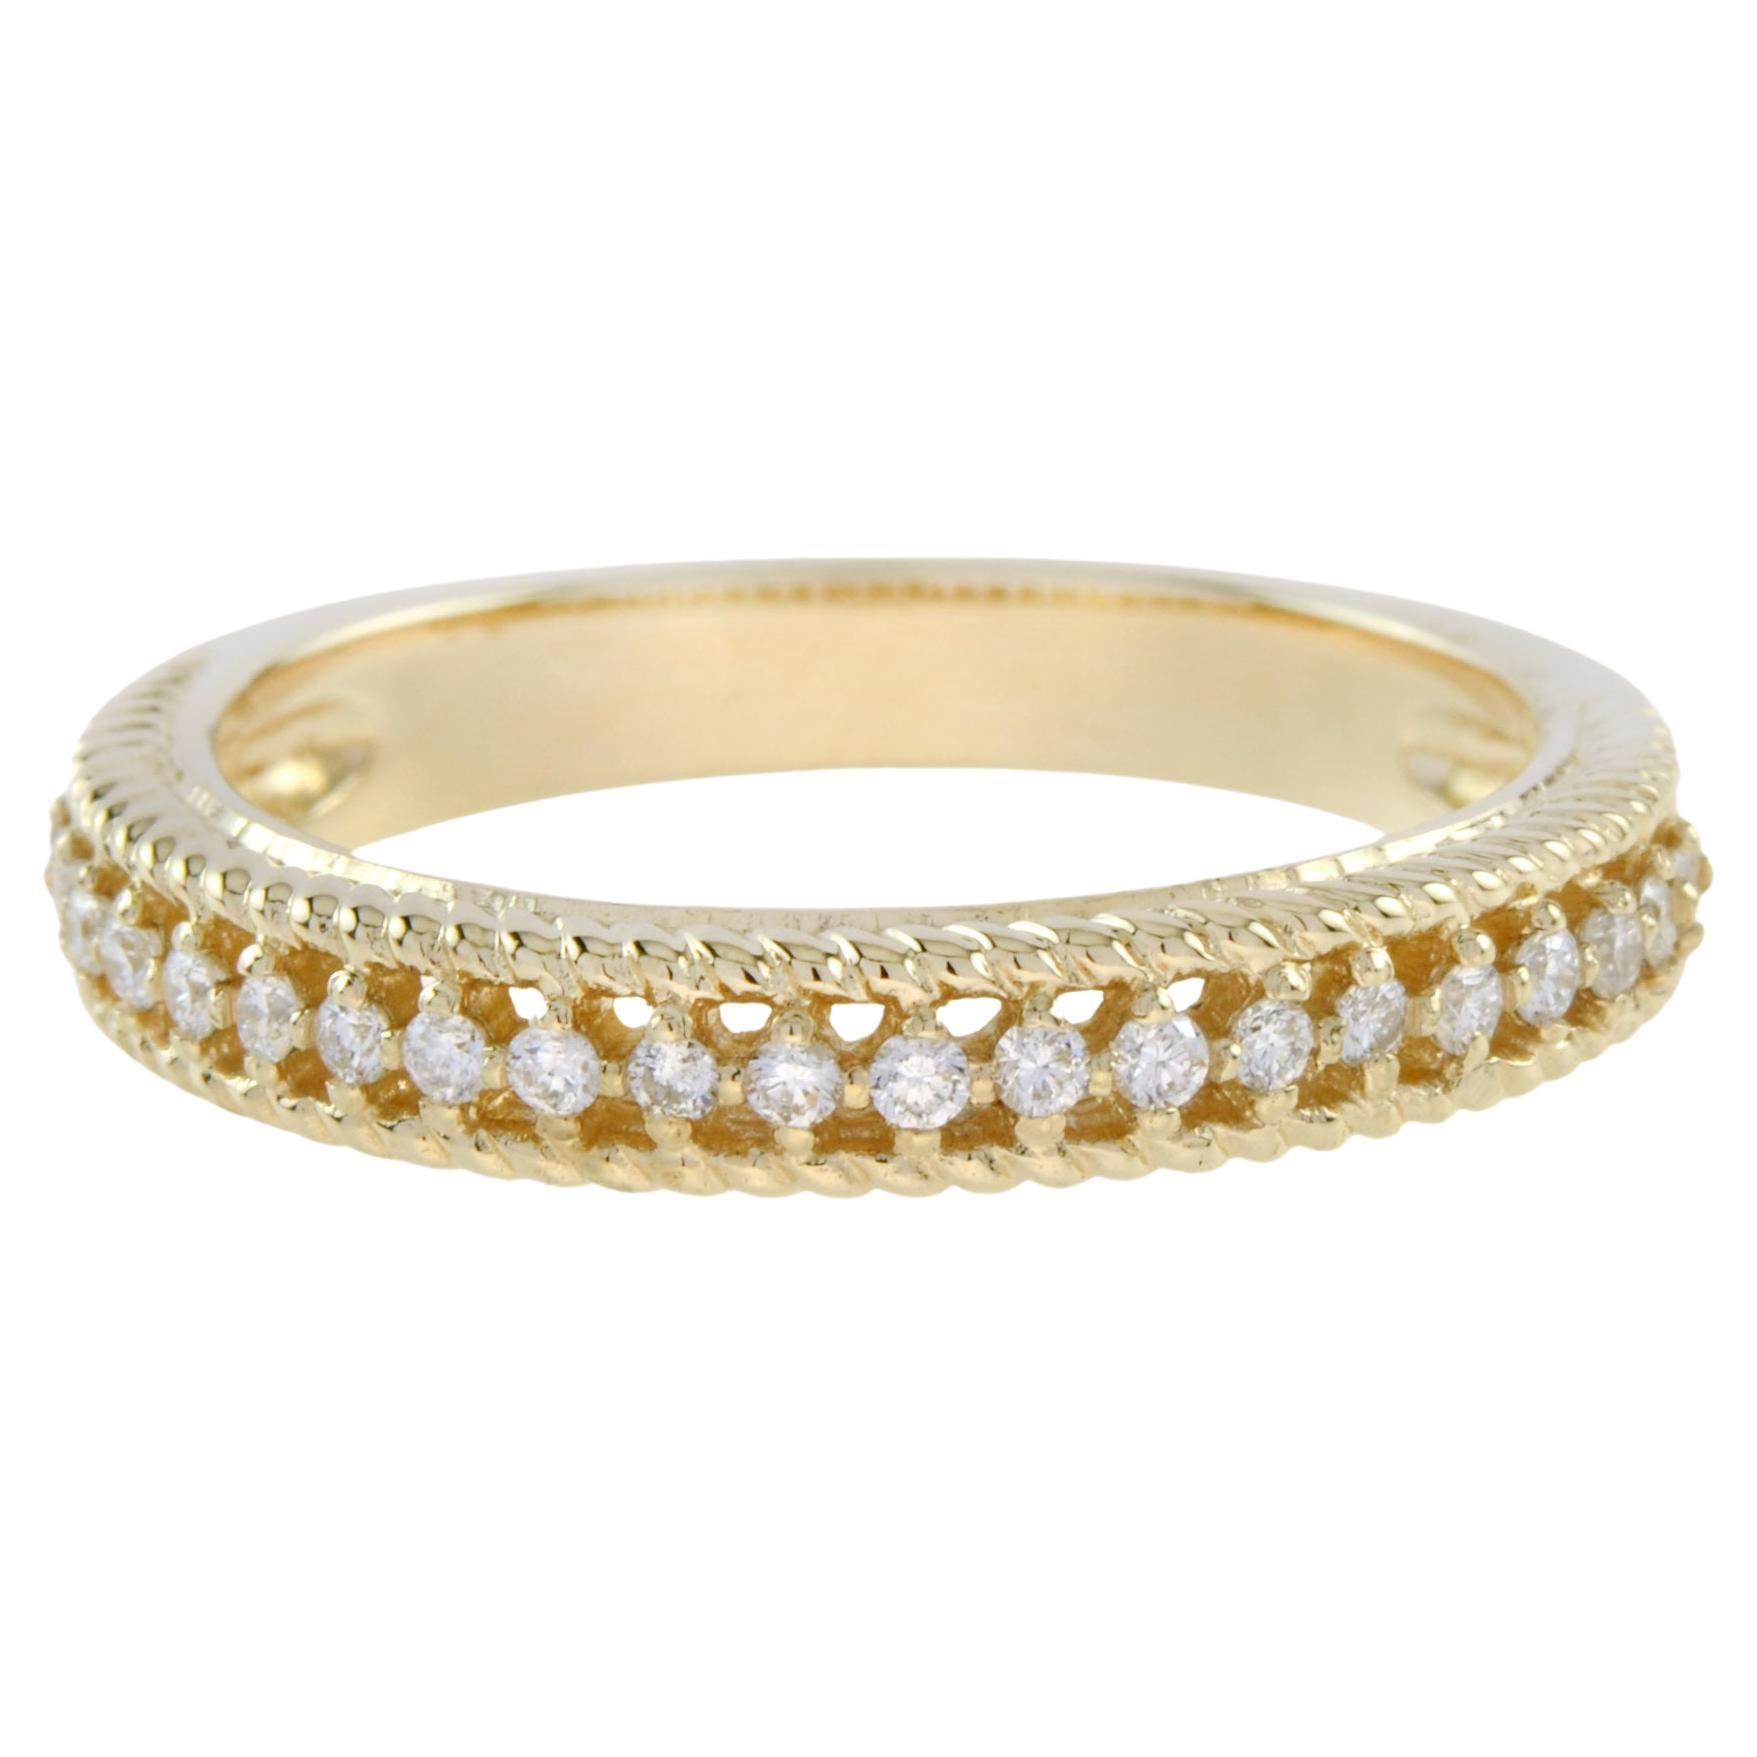 For Sale:  Vintage Style Diamond Half Eternity Wedding Band Ring in 14K Yellow Gold